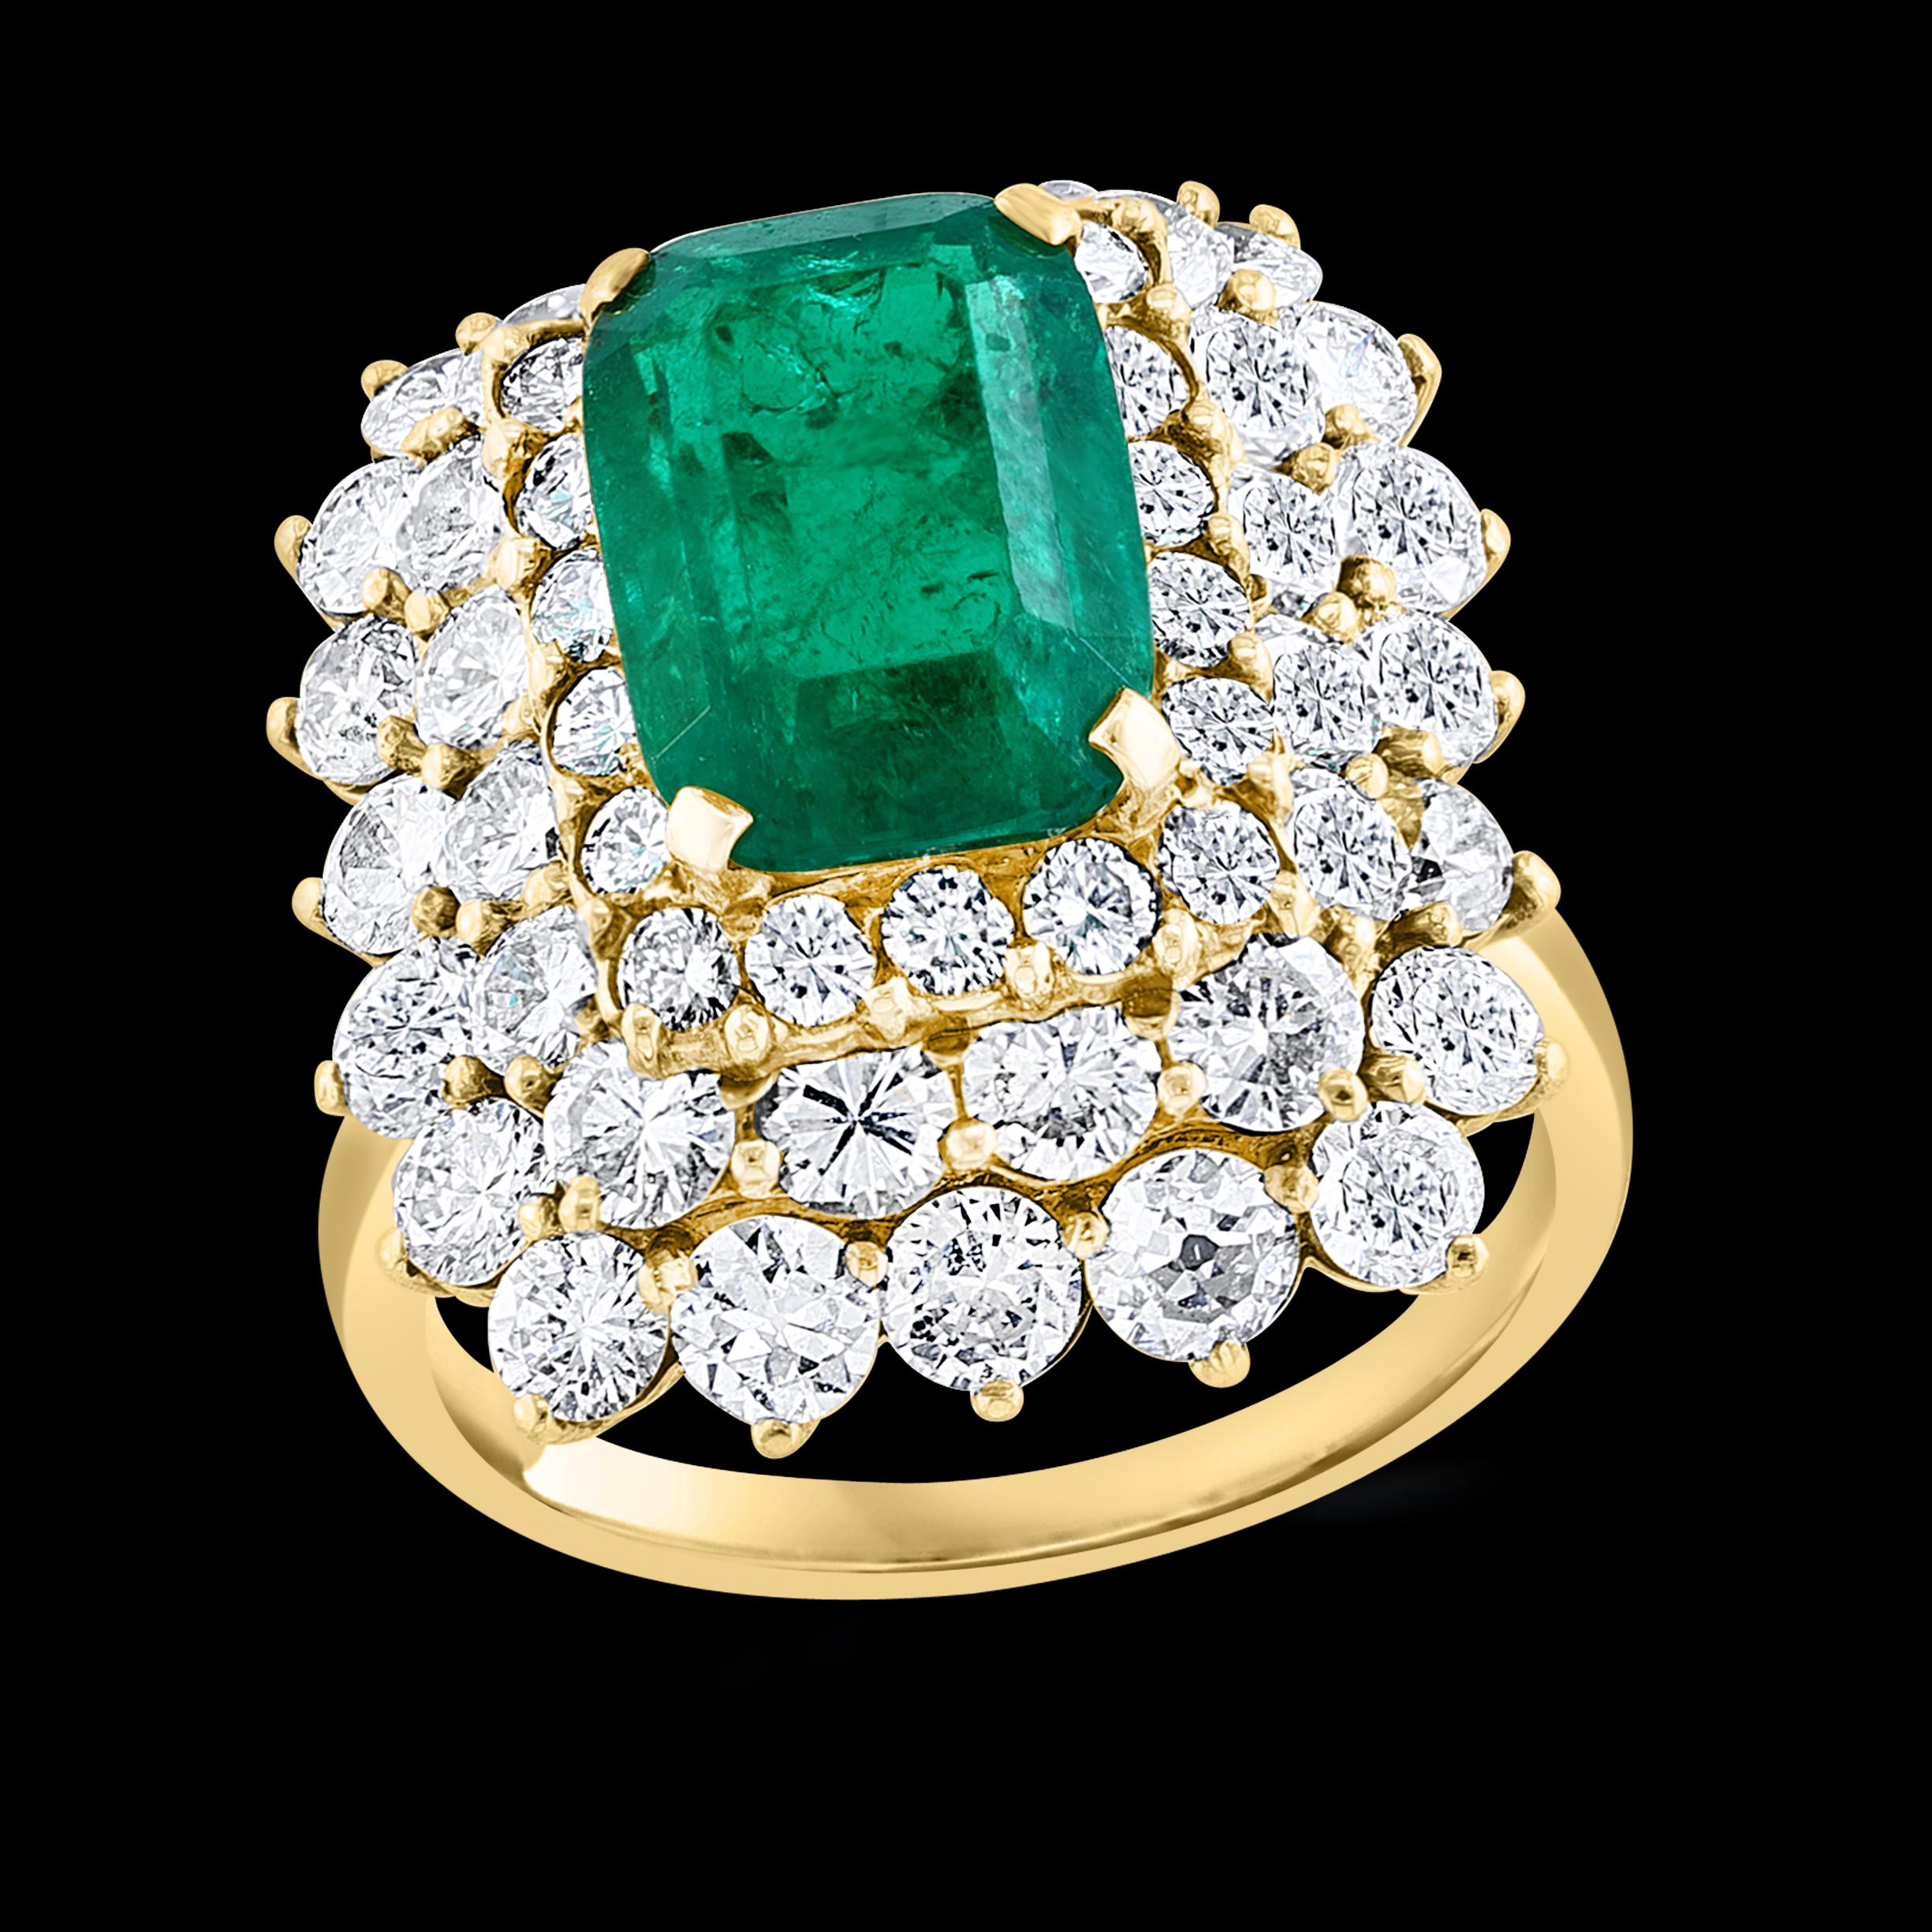 GIA Certified 3.41 Carat Cushion Cut Colombian Emerald & Diamond Ring 18K Y Gold For Sale 15